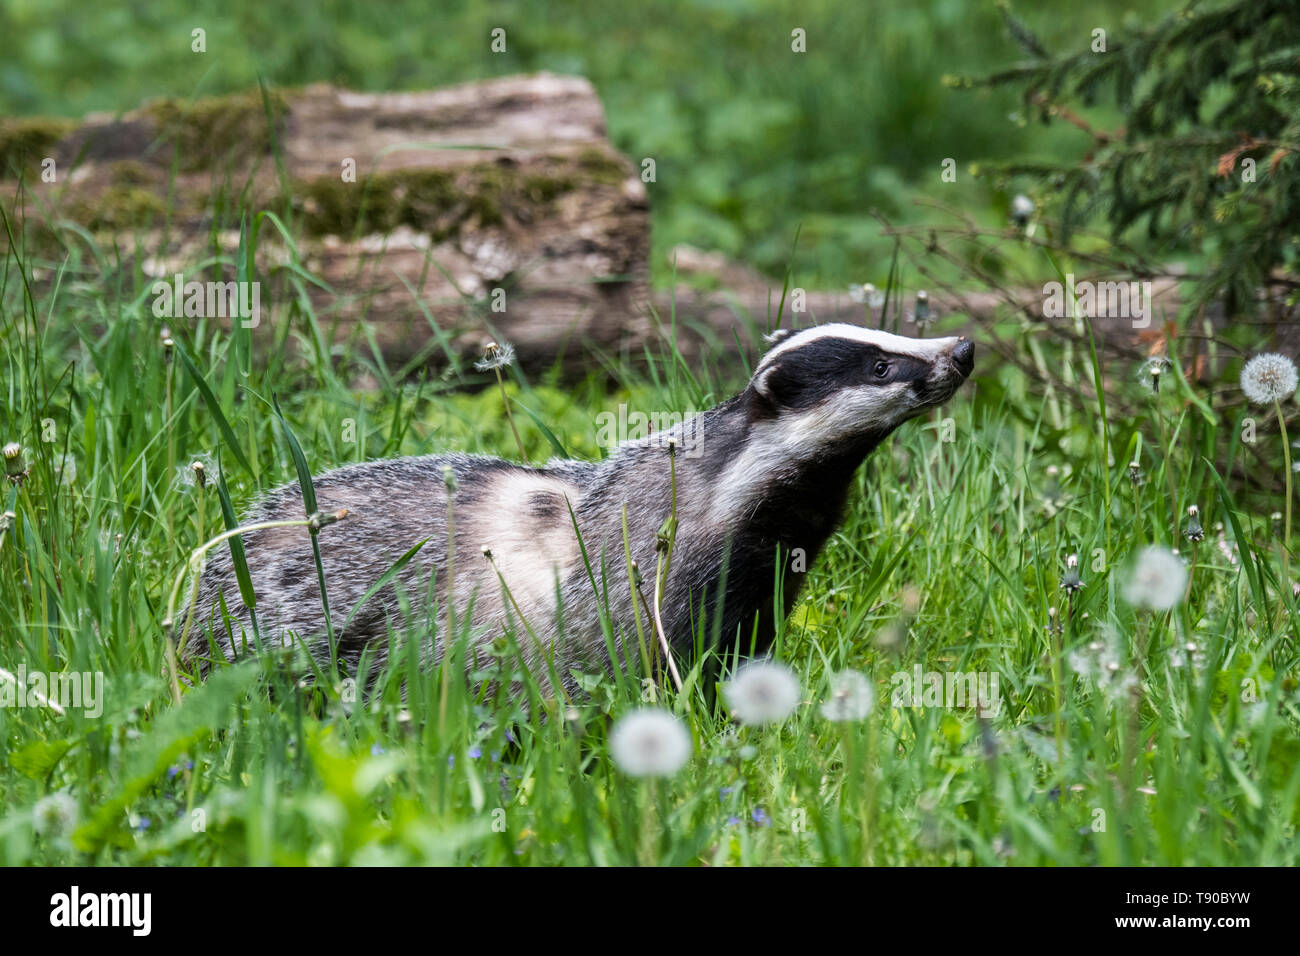 European badger (Meles meles) foraging in grassland with wildflowers at forest edge in spring Stock Photo